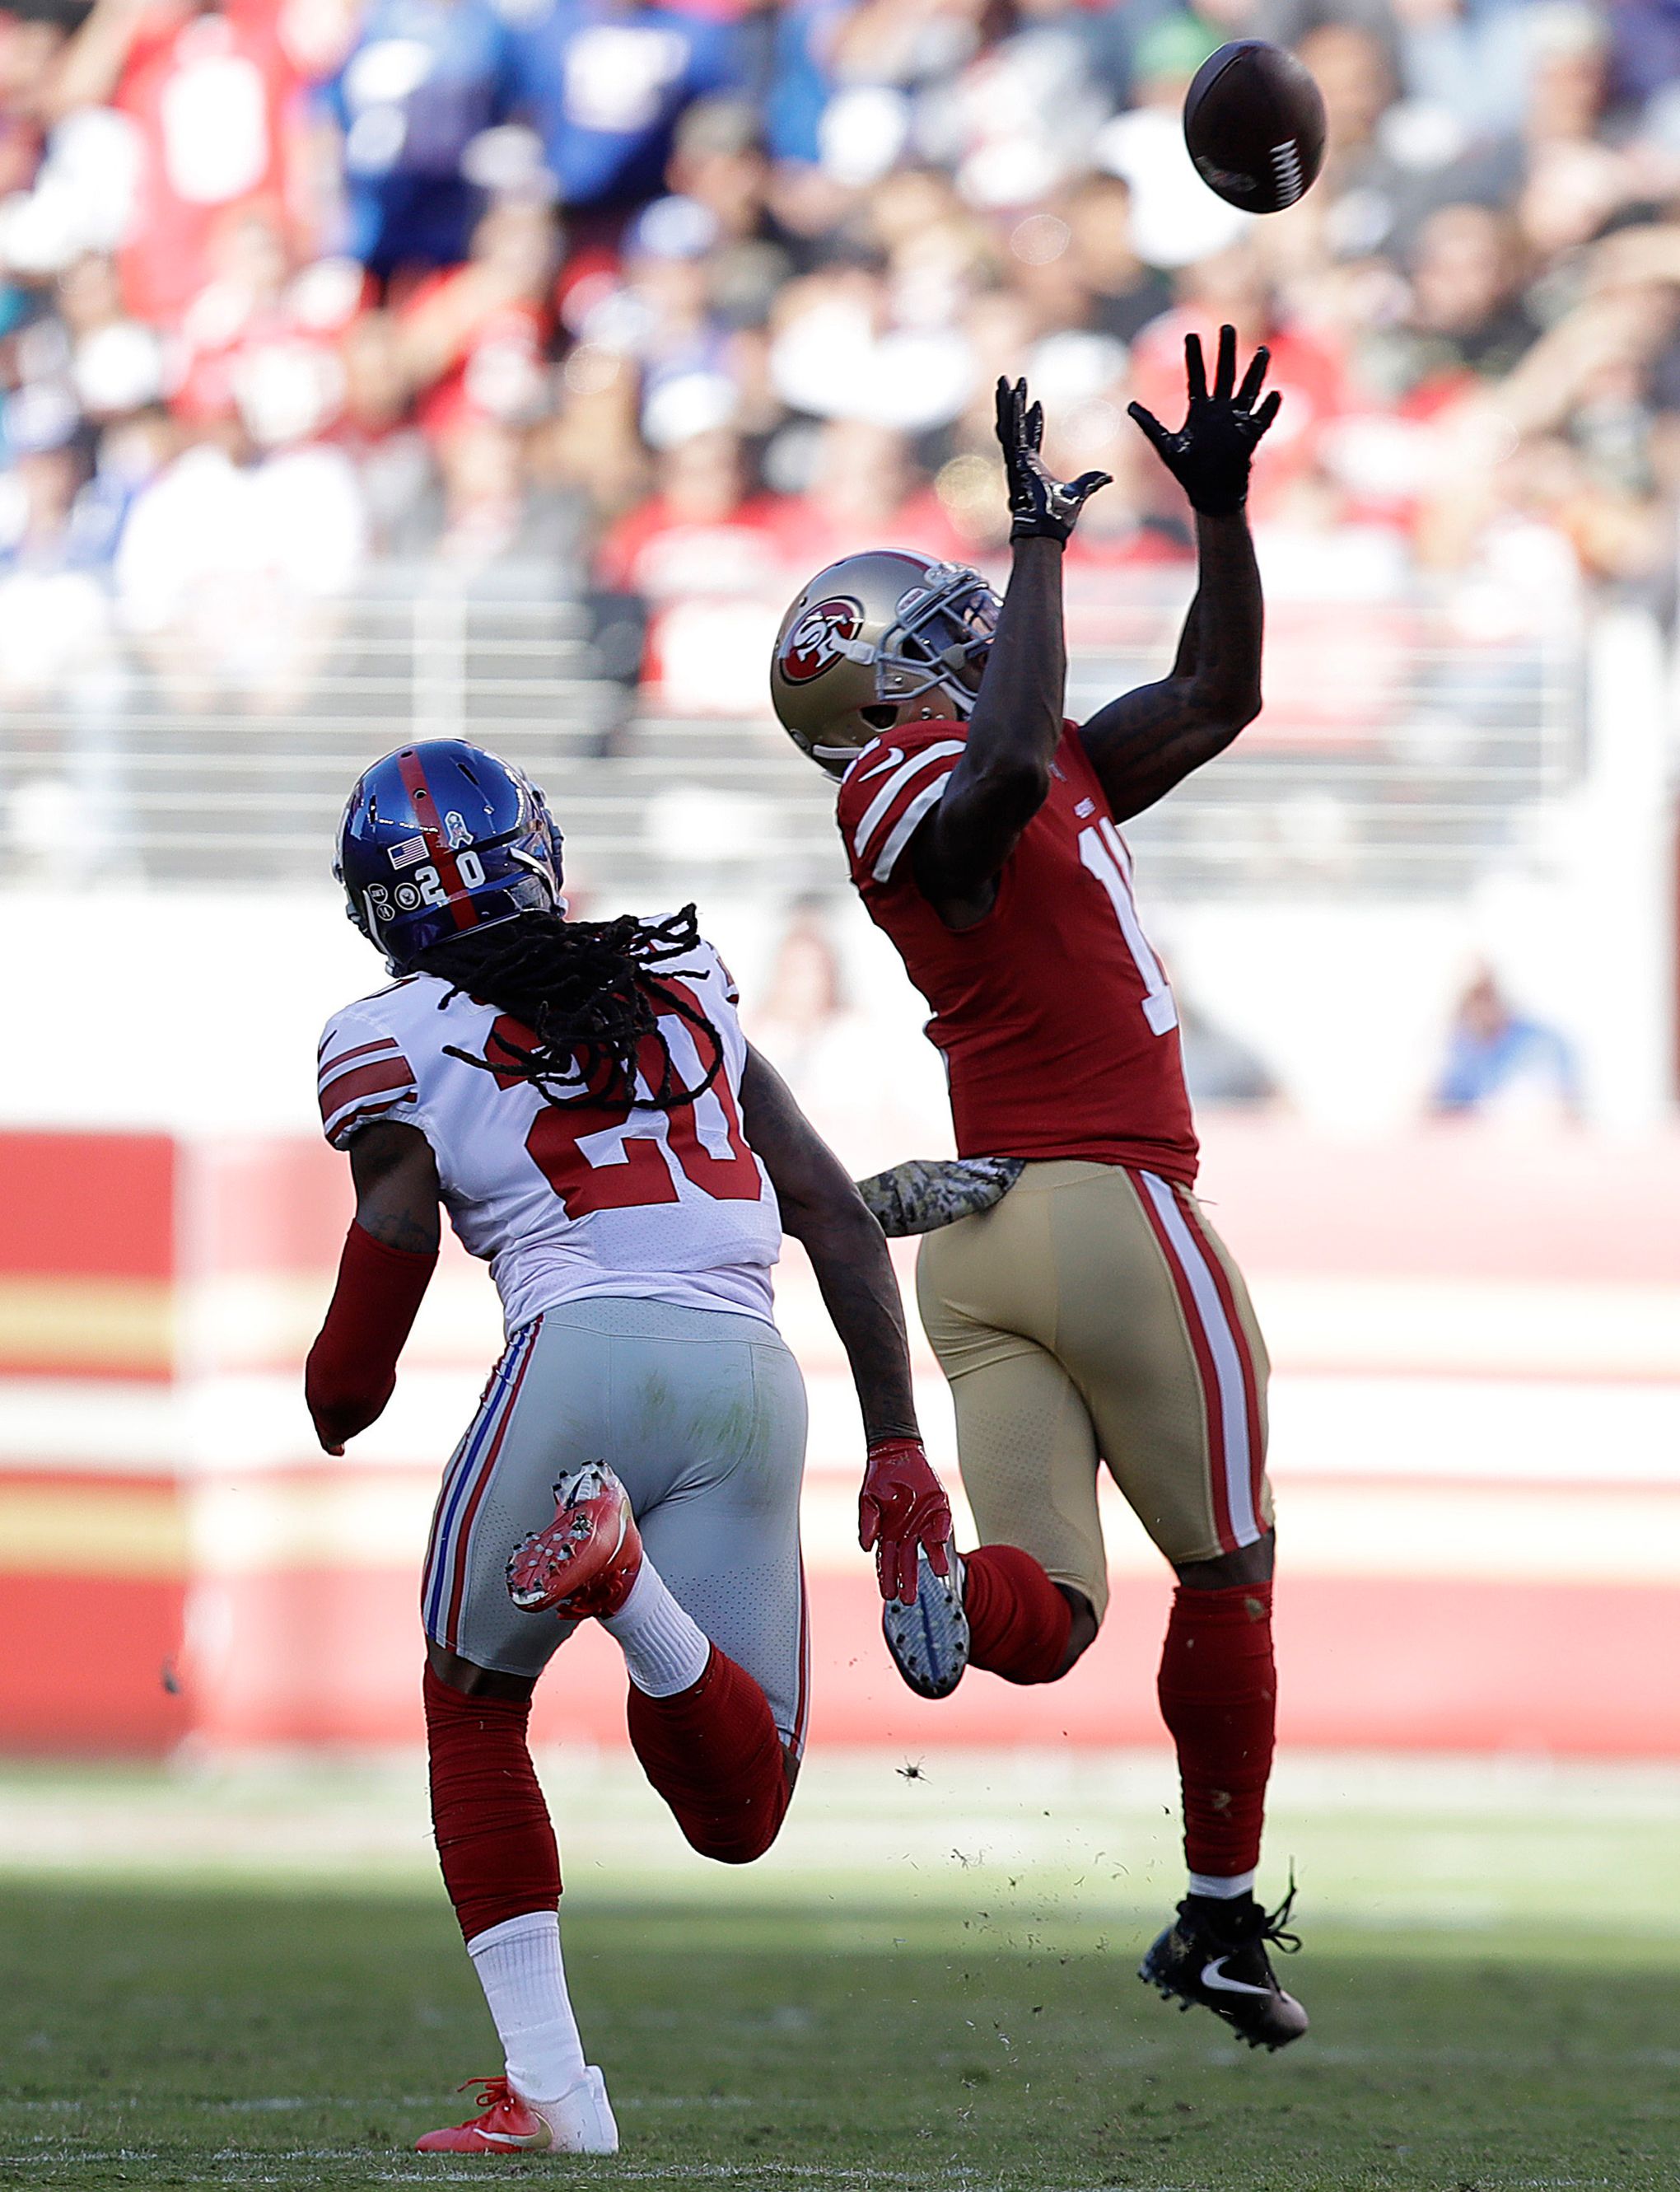 Marquise Goodwin hopes heartbreak of losing son helps others